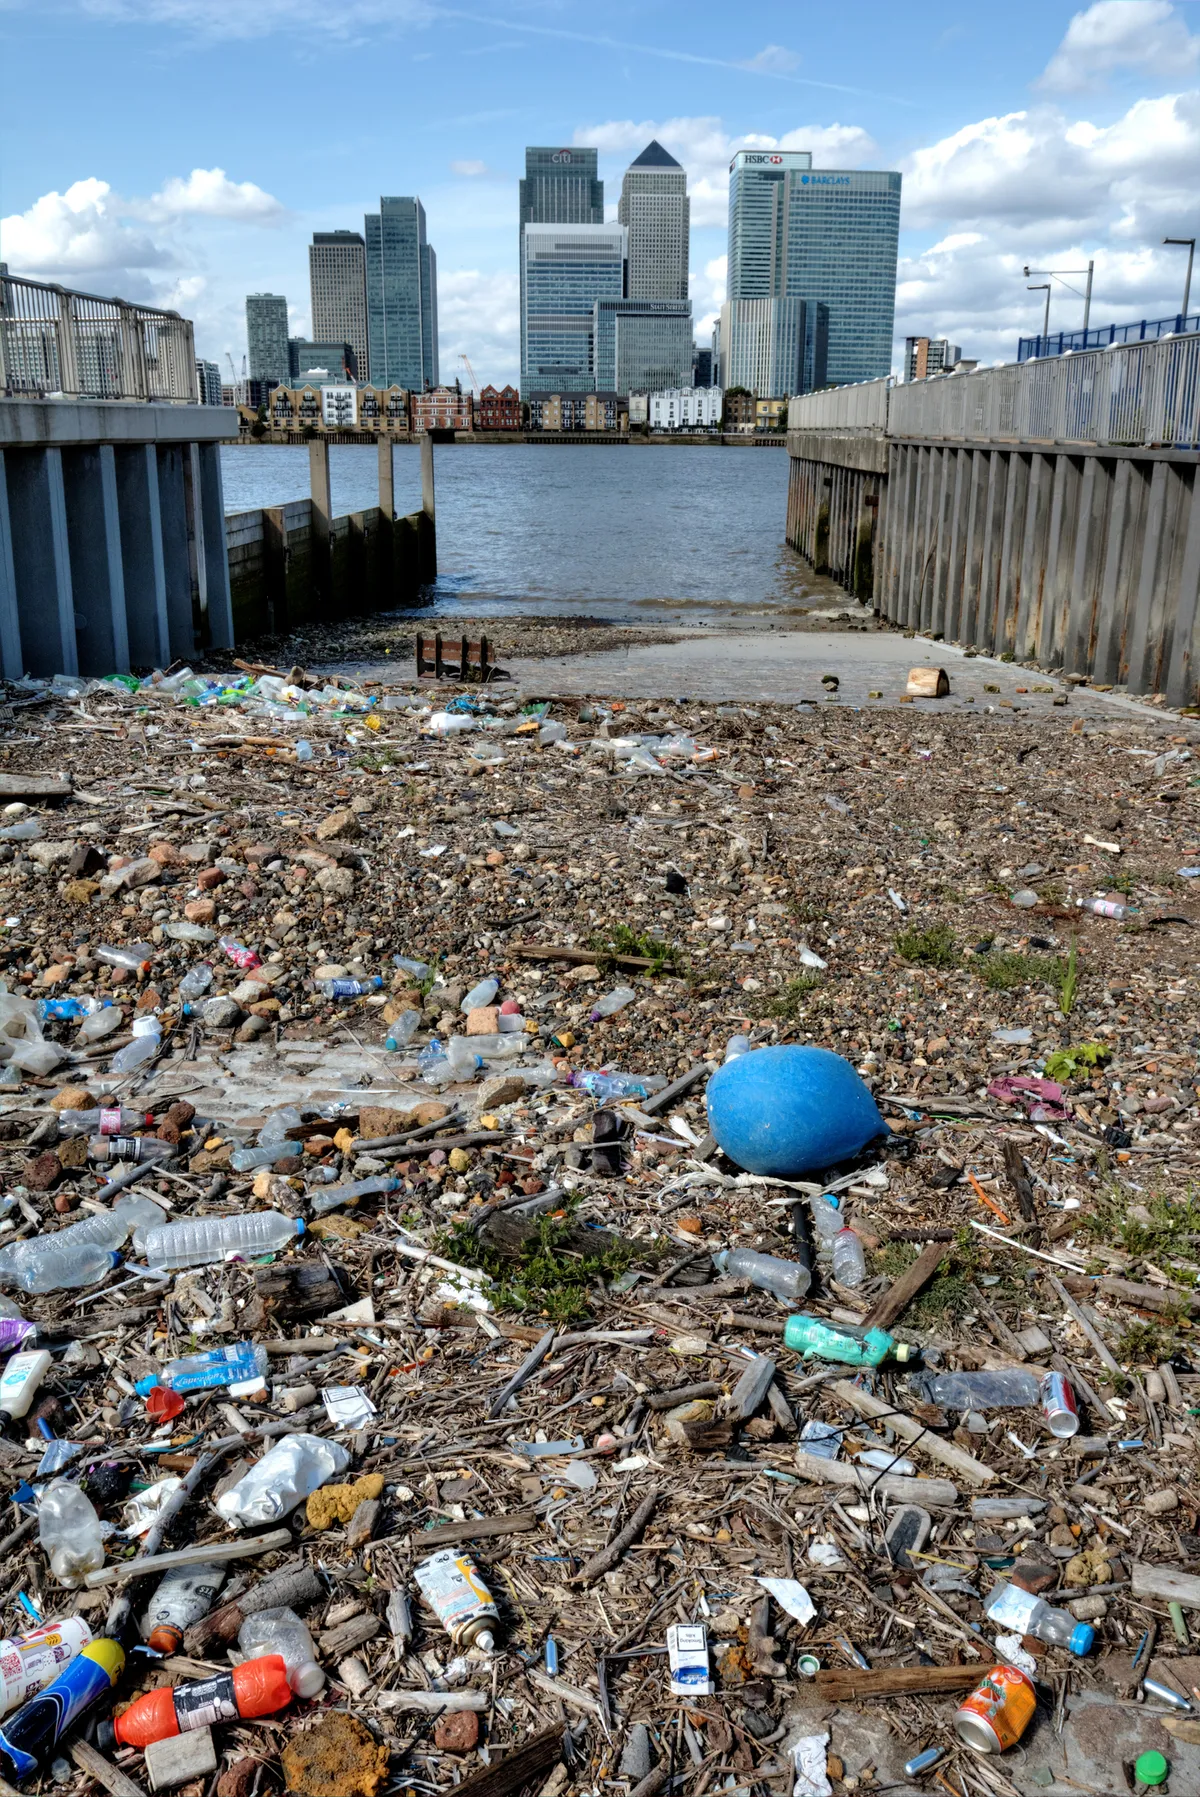 River Thames at North Greenwich showing the rubbish and debris washed up on the foreshore. © Susan Walker/Getty